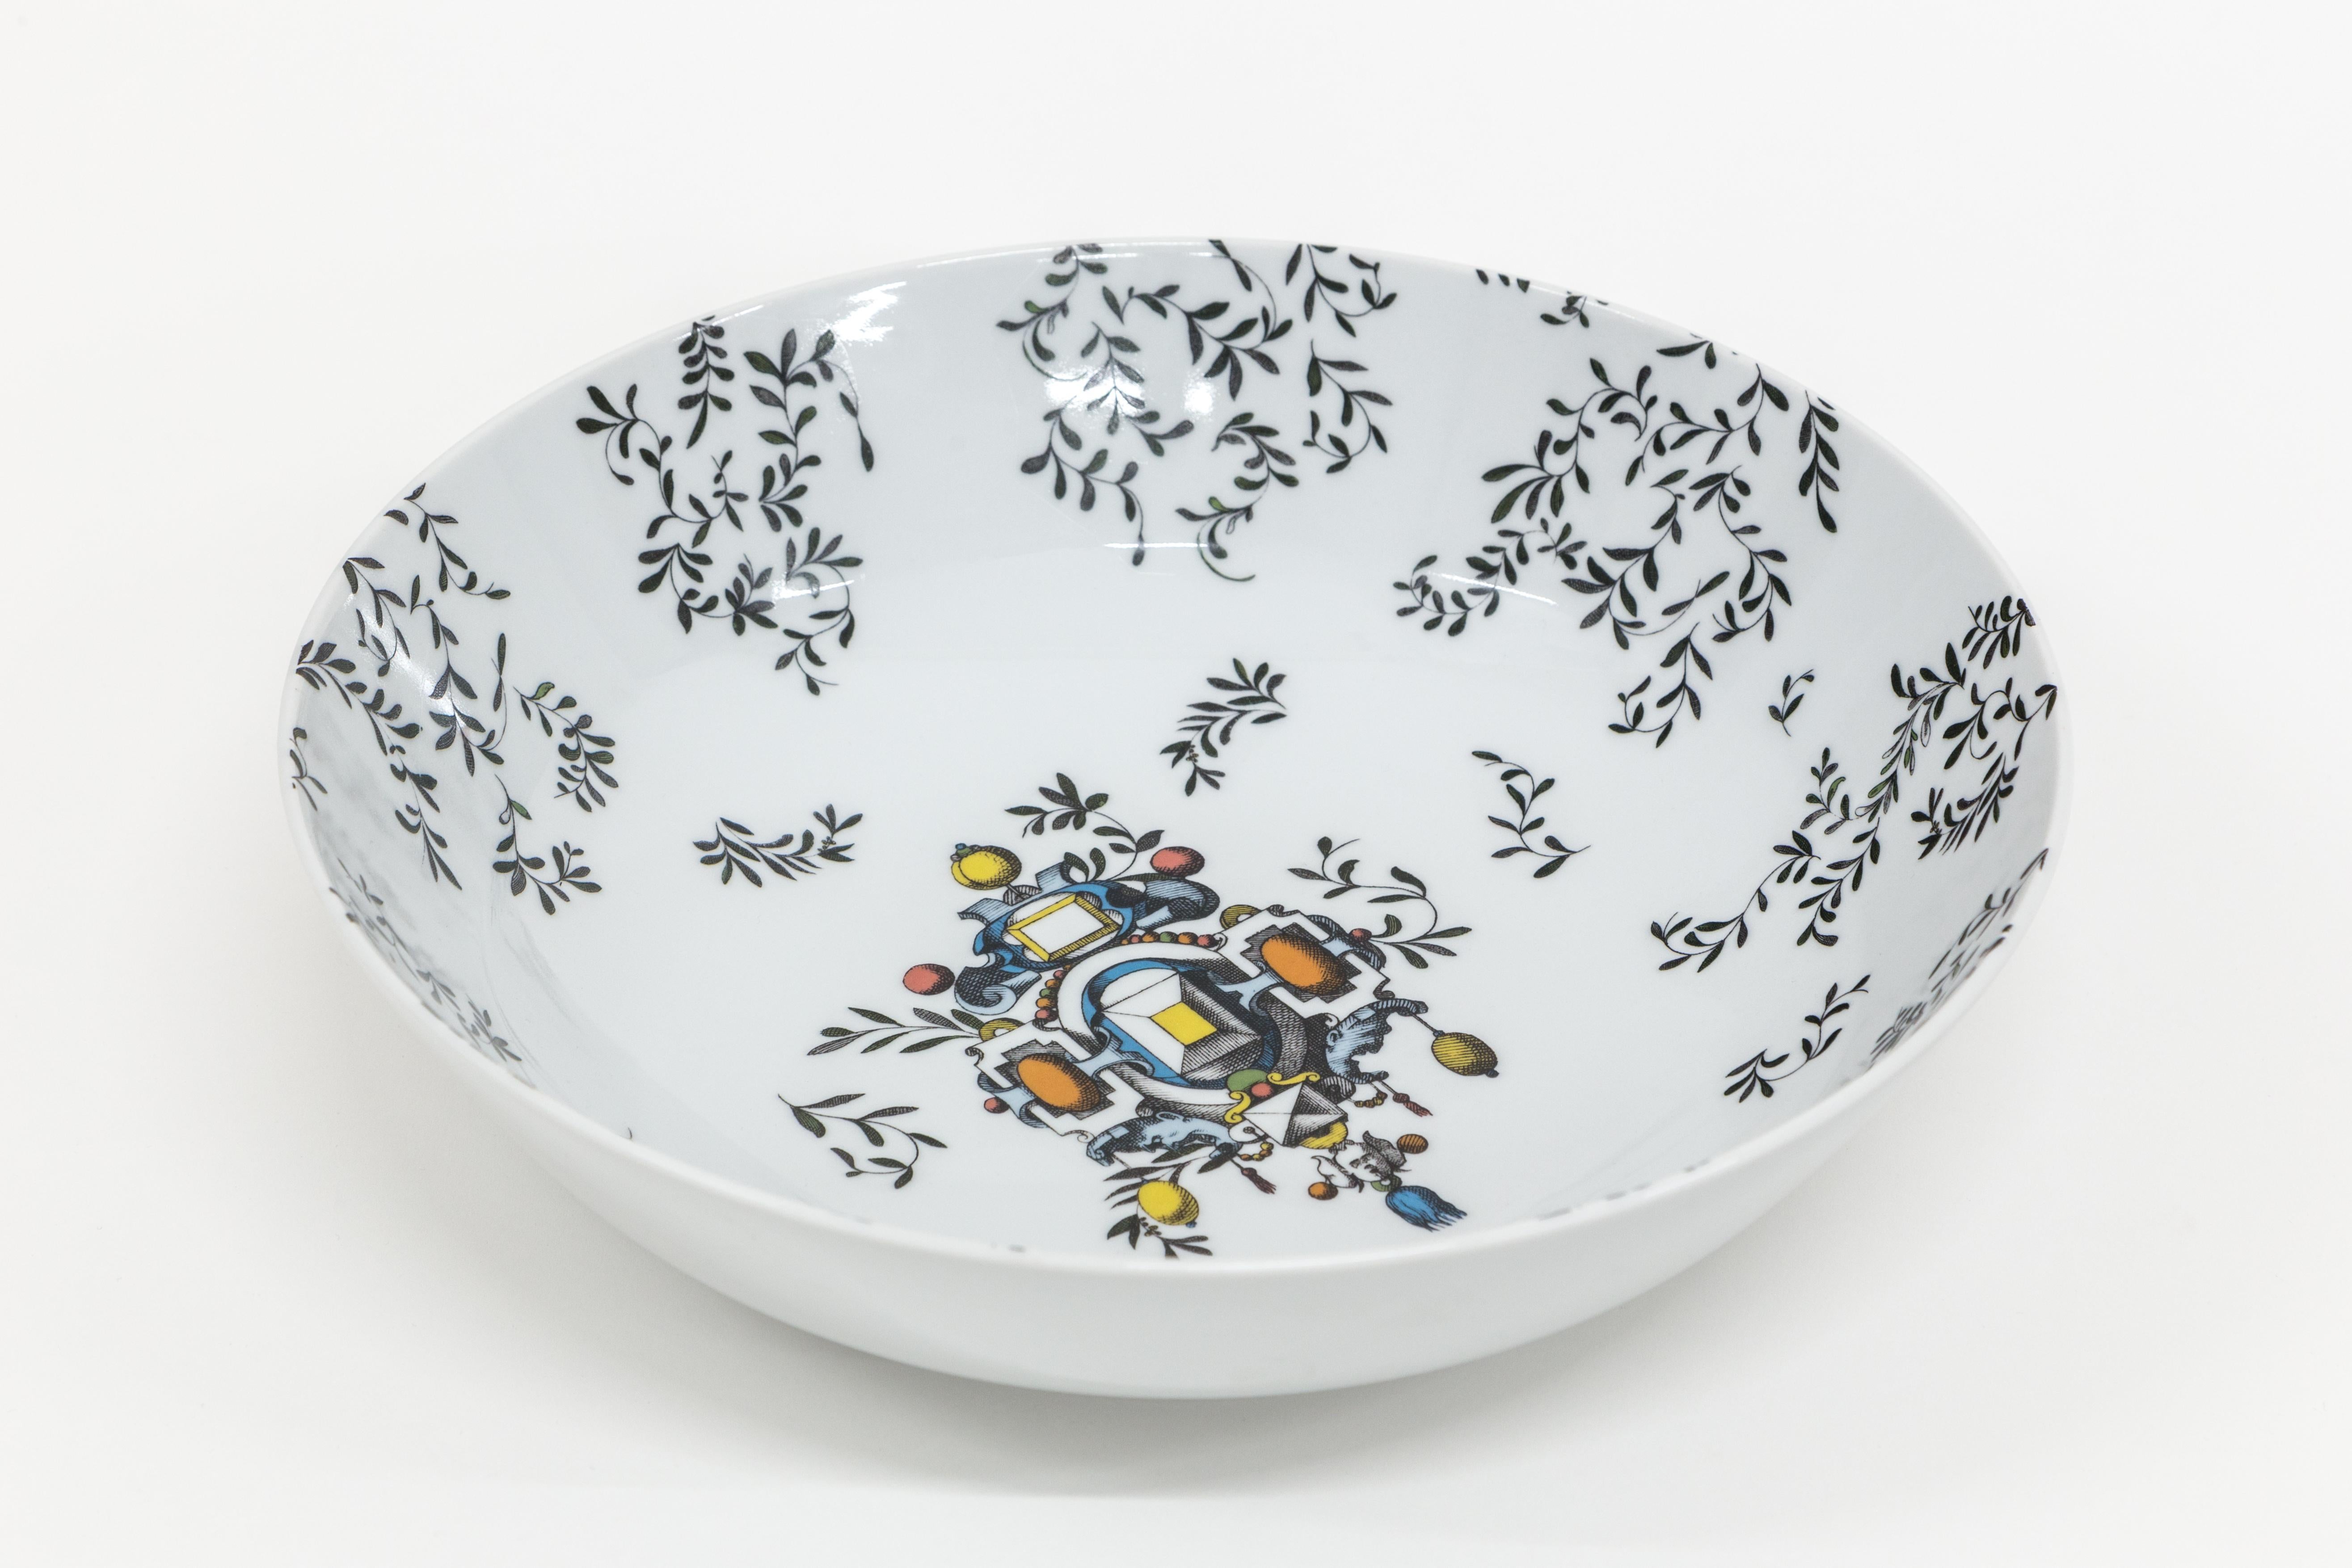 This 34cm diameter bowl is part of the Pompeii collection by Grand Tour By Vito Nesta. The very versatile shape is suitable as a fruit stand, table centerpiece or ornamental bowl on any shelf. The inner surface of this porcelain is studded with